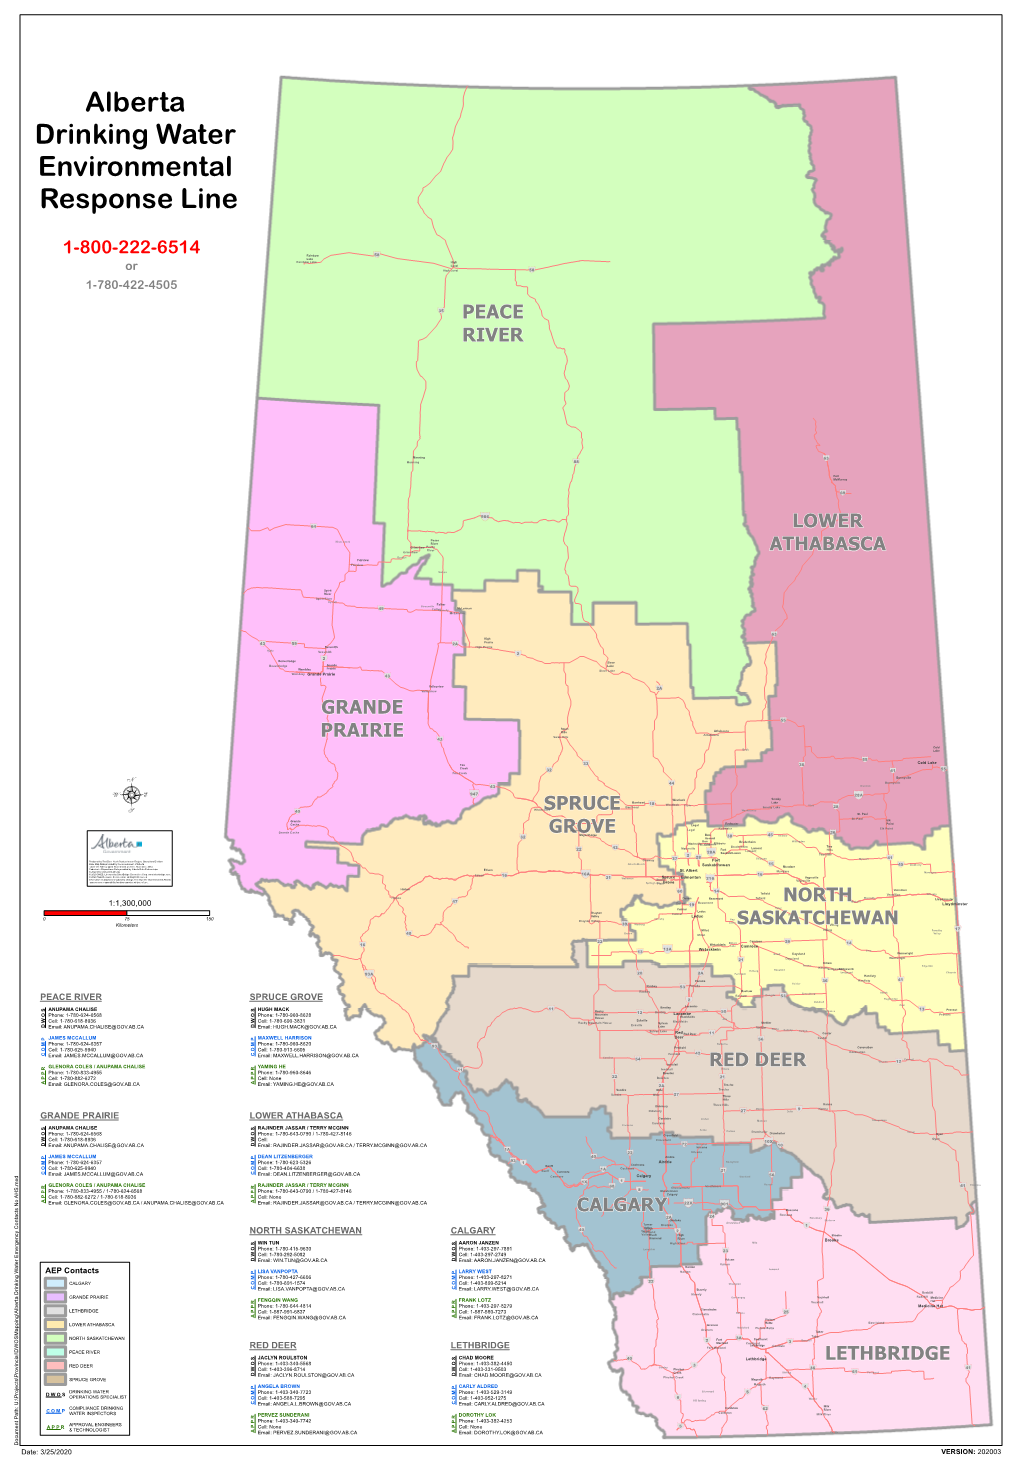 Alberta Drinking Water Environmental Response Line [And Contacts by Region]